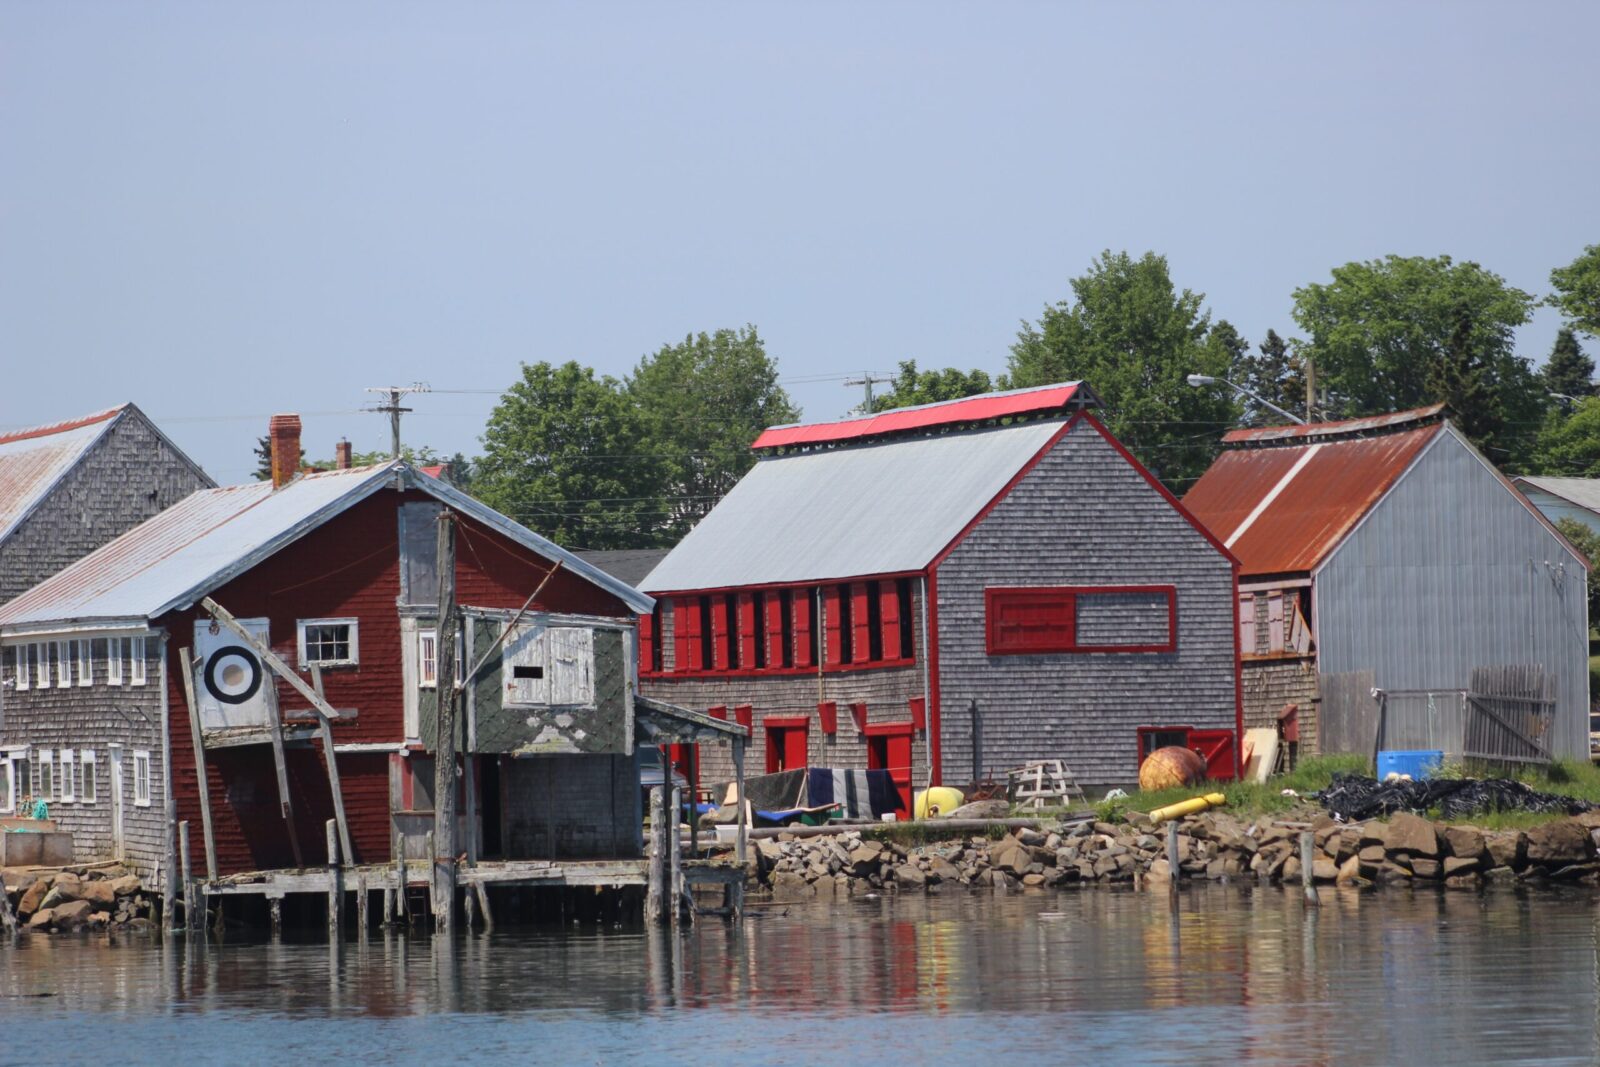 A row of red houses next to a body of water.